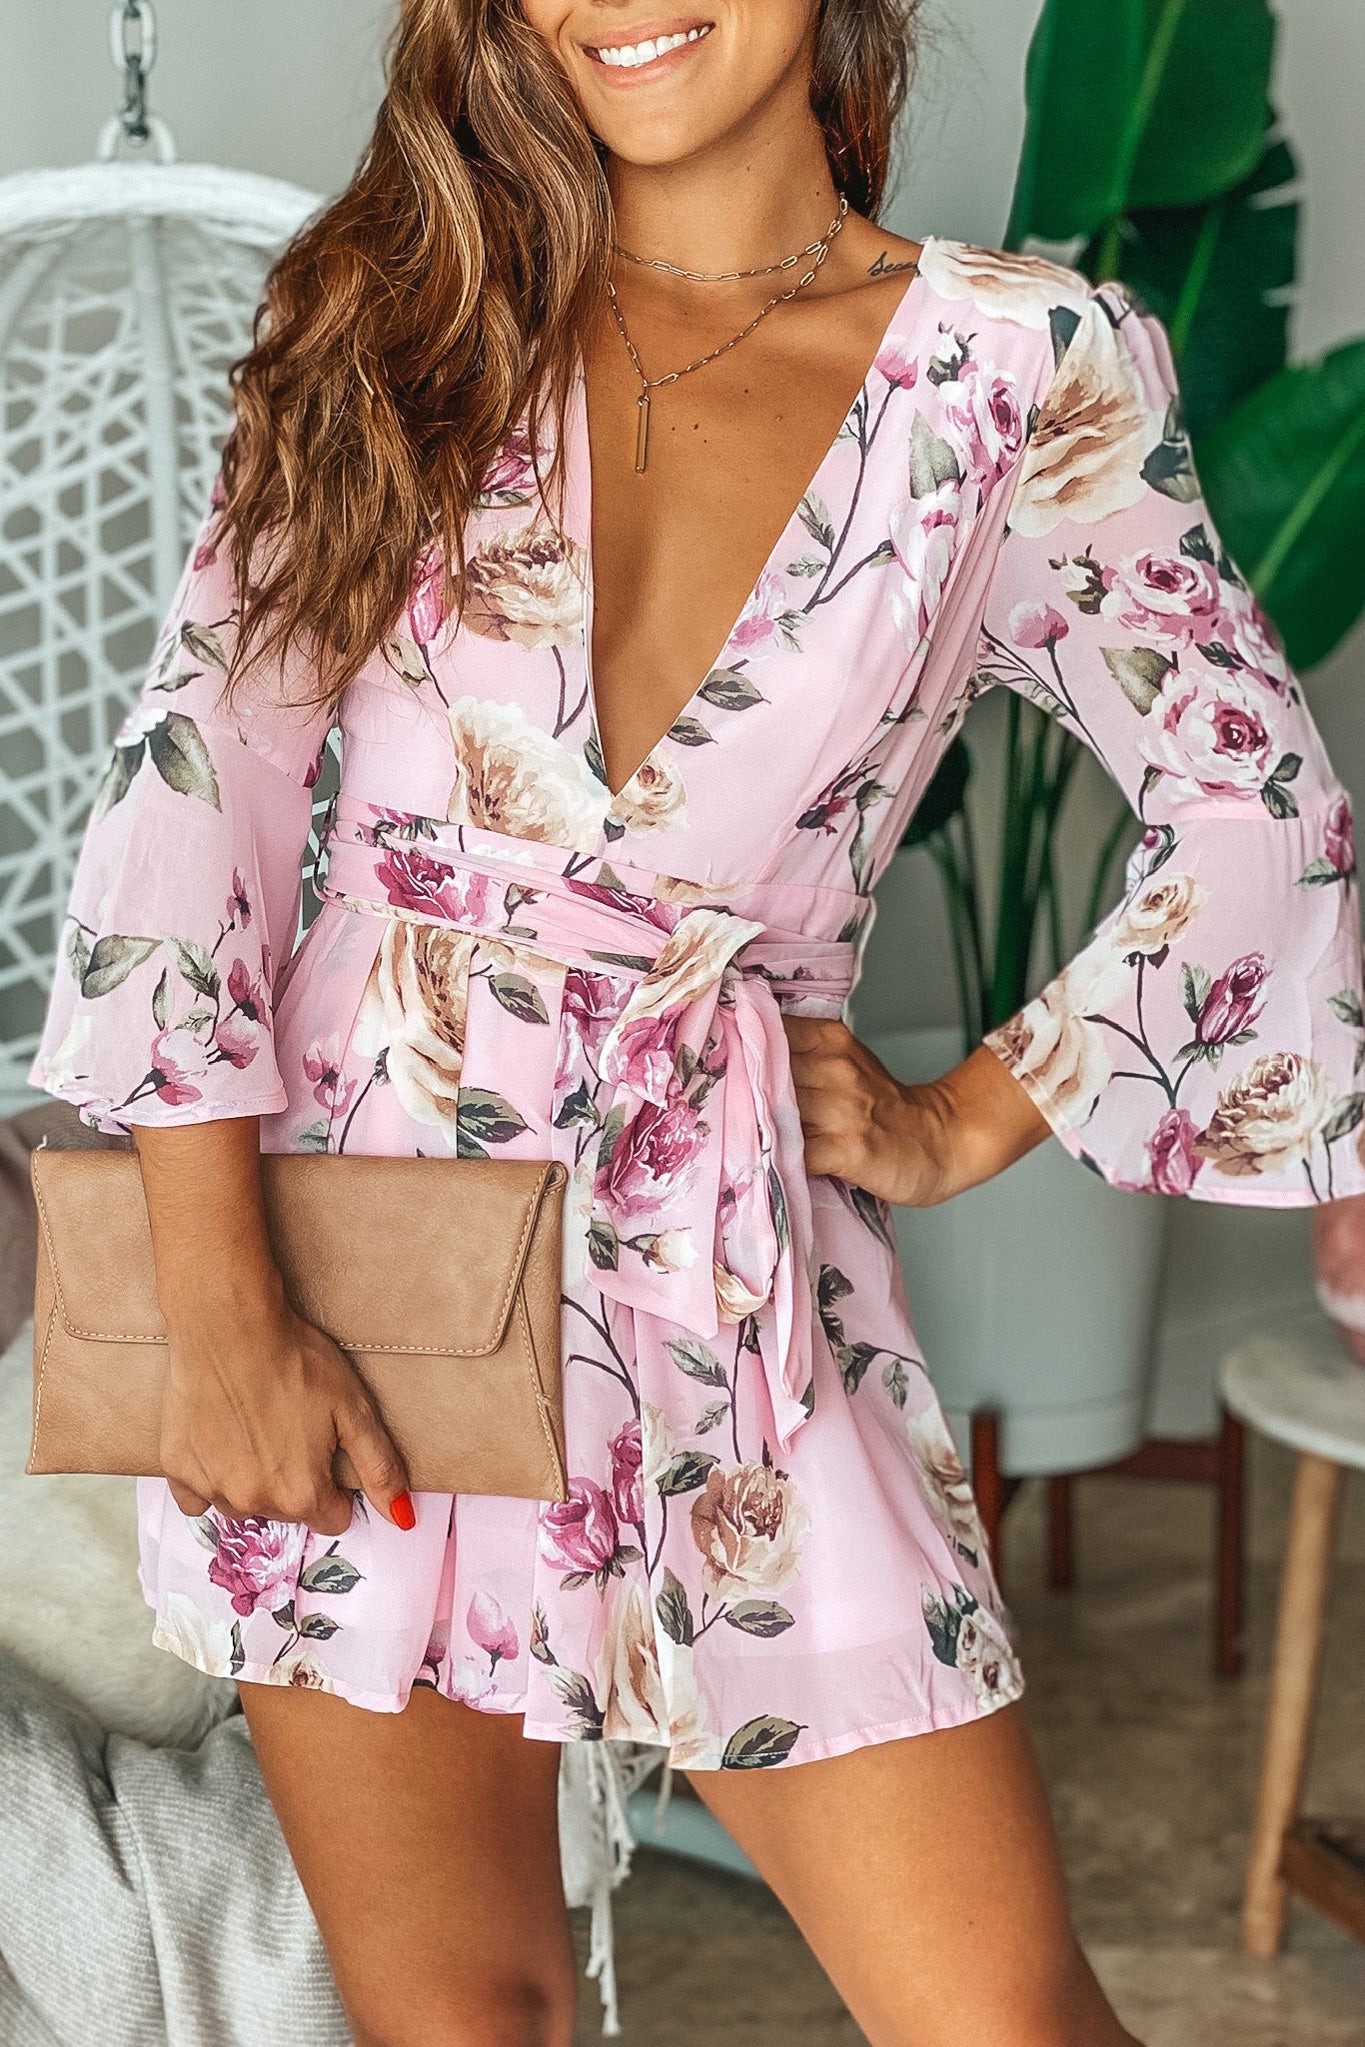 Lifestyle dusty pink floral romper